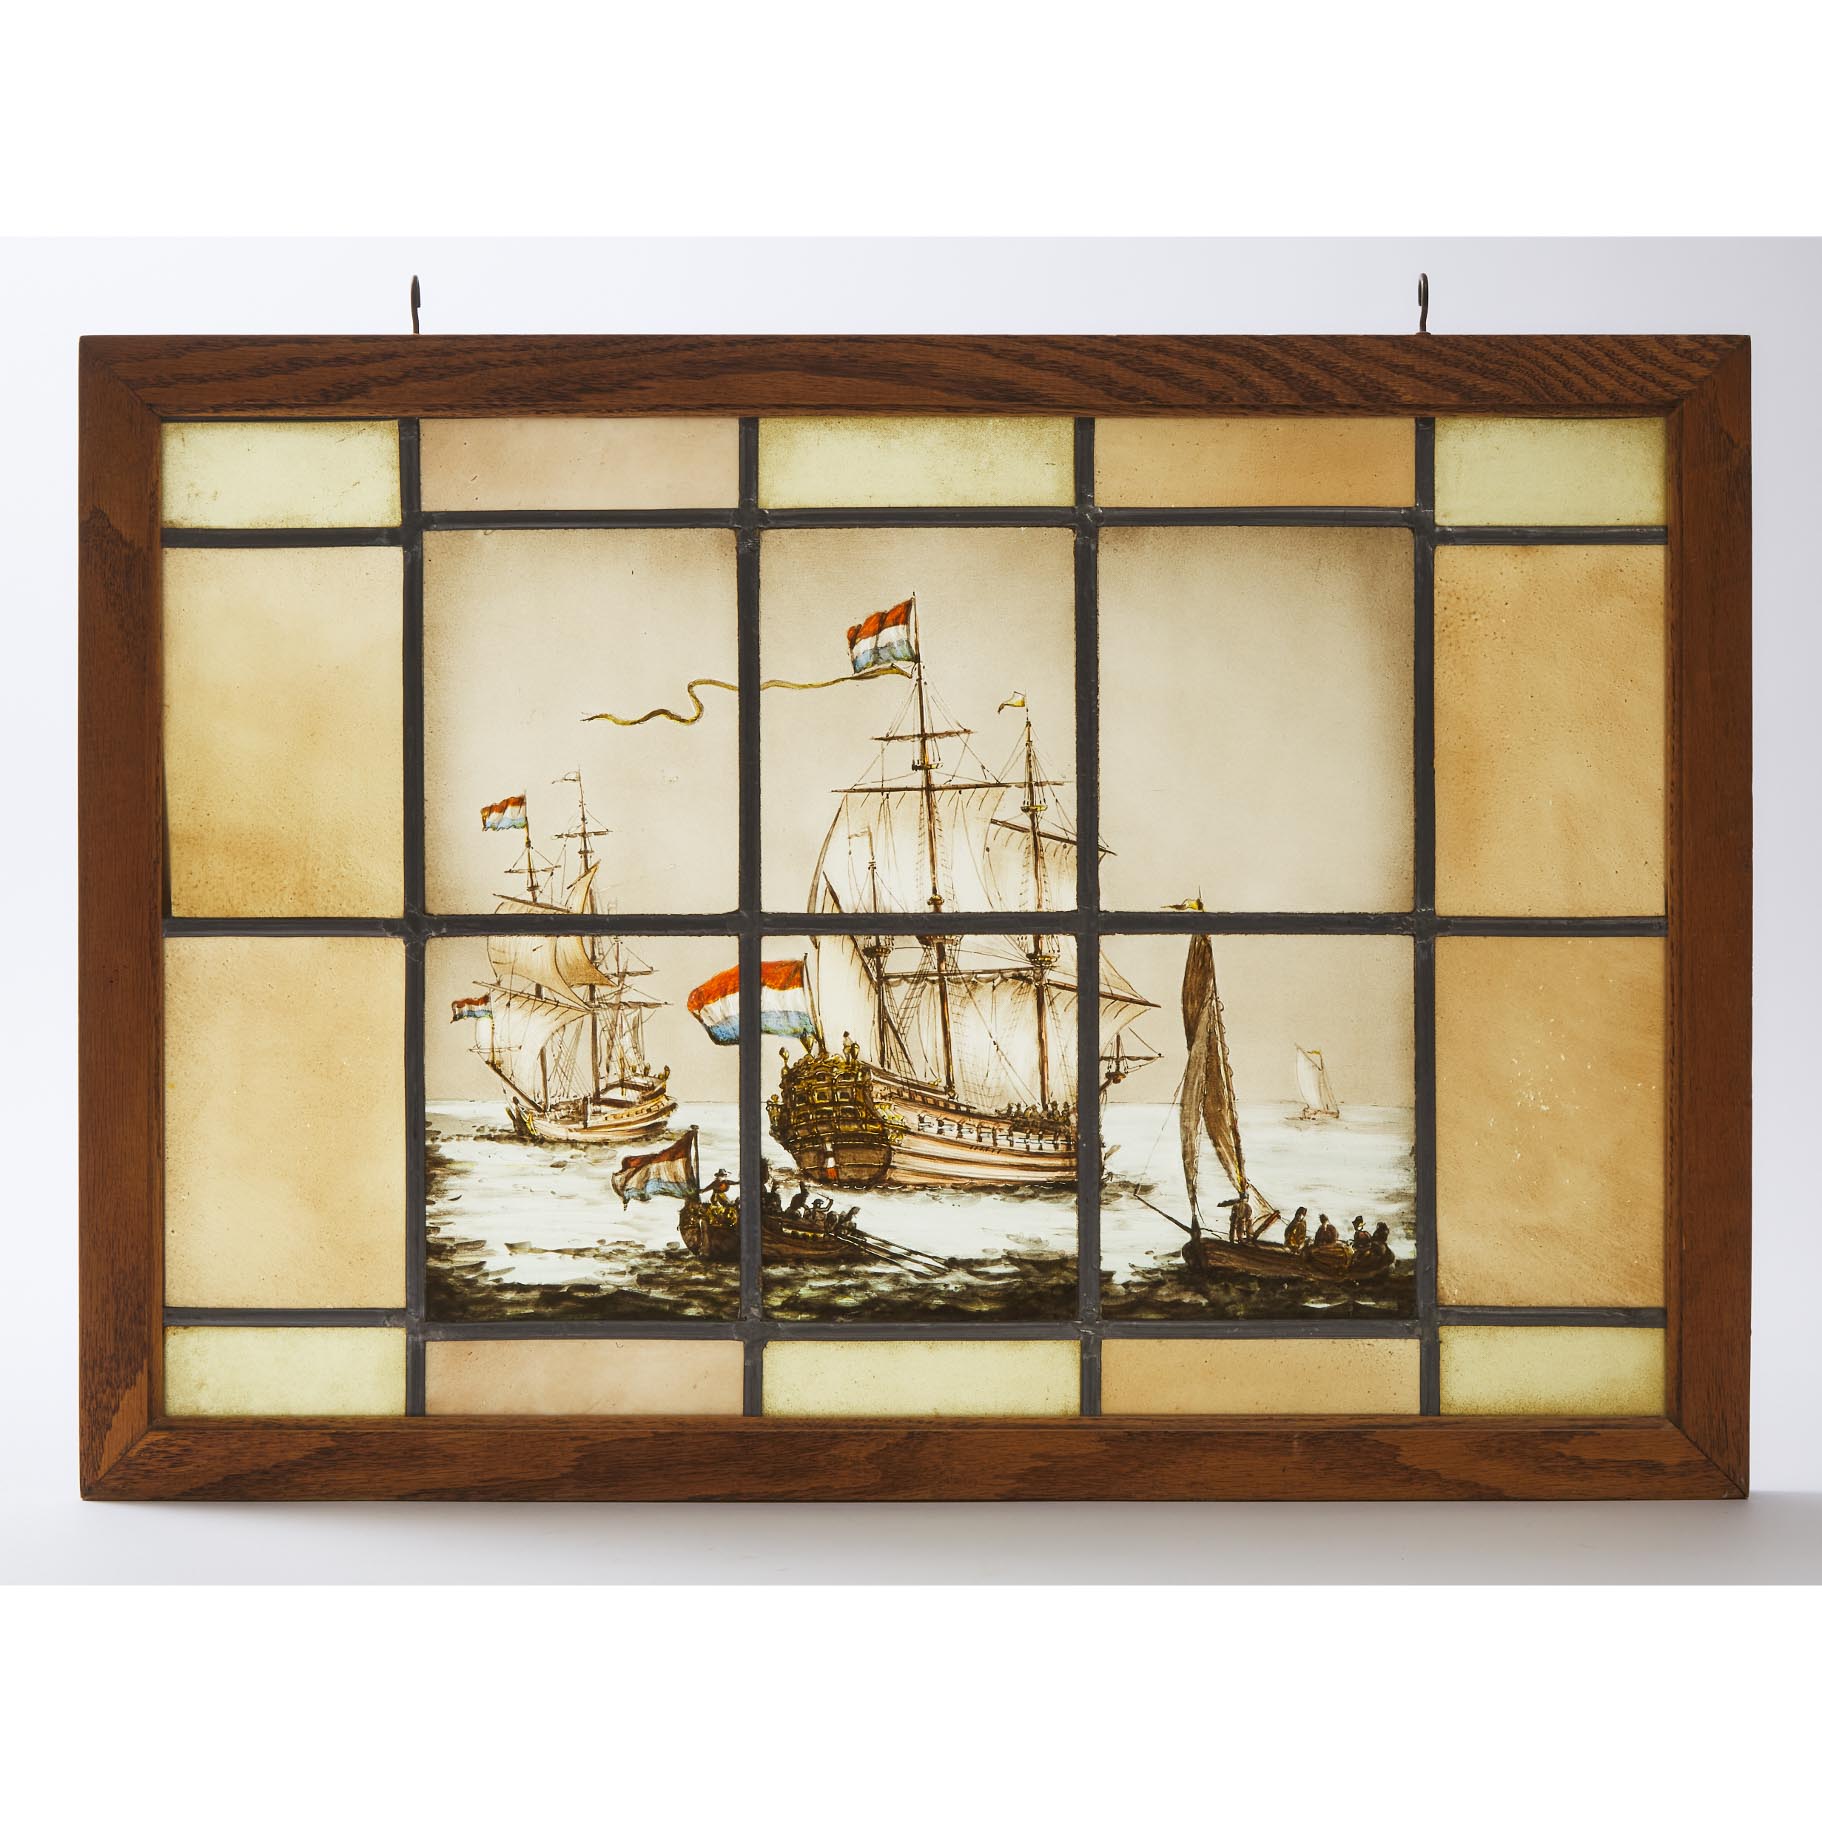 Pair of French Nautical Theme Stained Glass Windows, 19th century